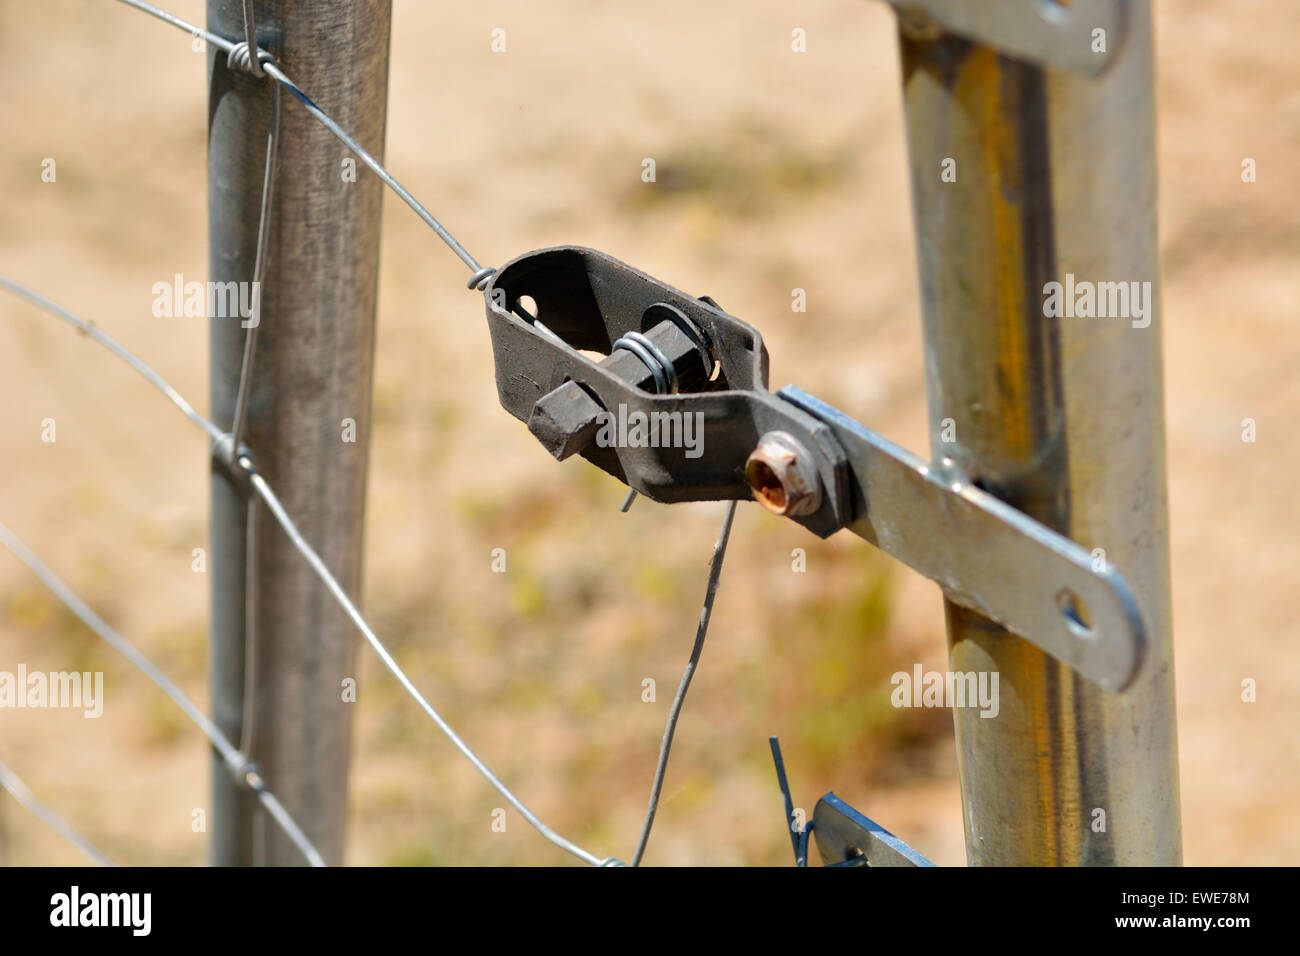 Simple wire tensioner on wire fence Stock Photo